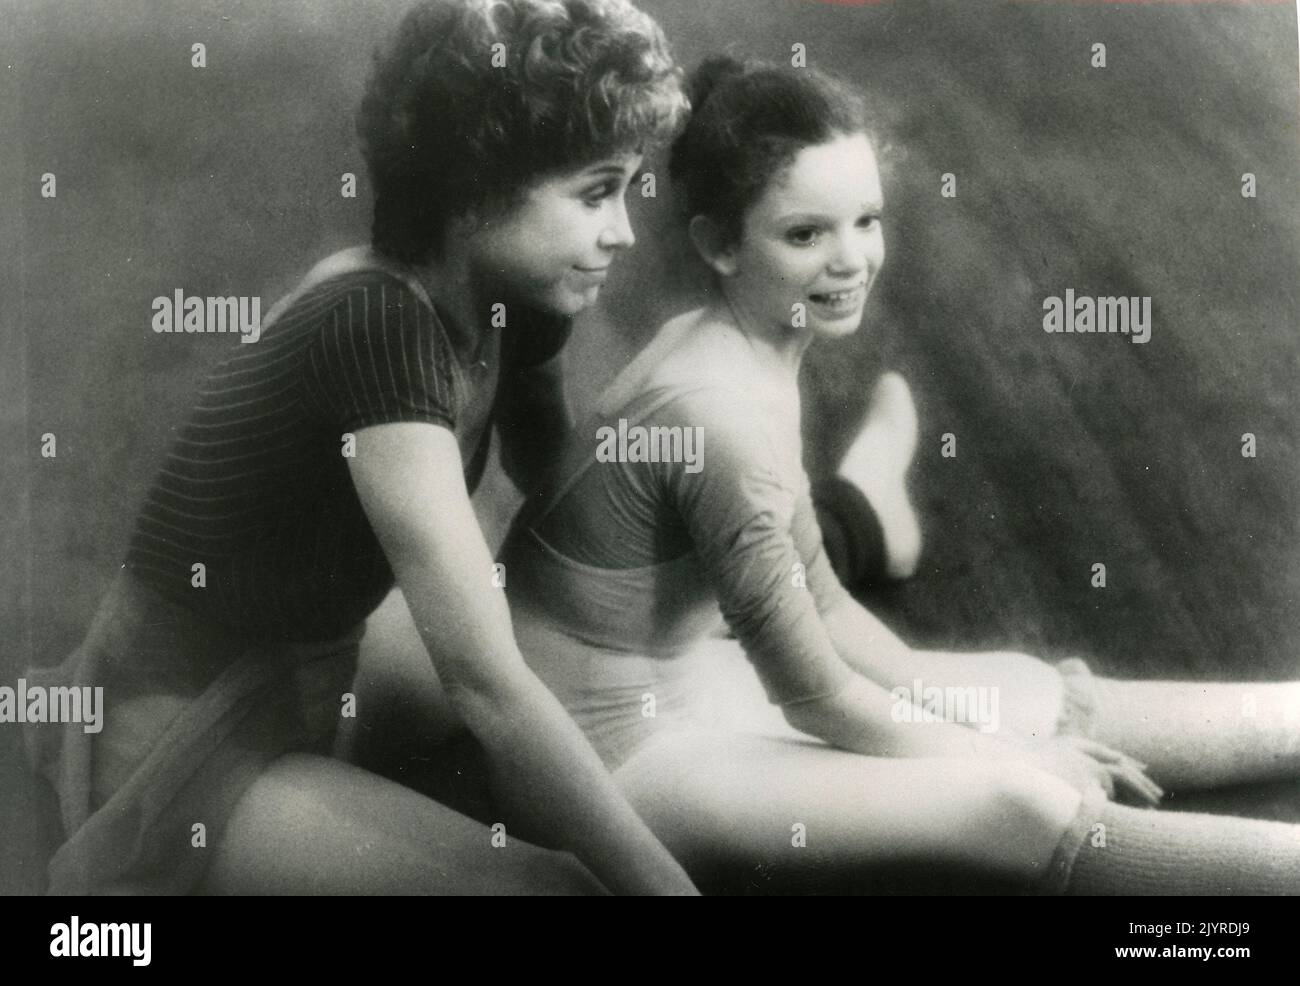 Actrices Mary Tyler Moore et enfant Katherine Healy dans le film six semaines, USA 1982 Banque D'Images